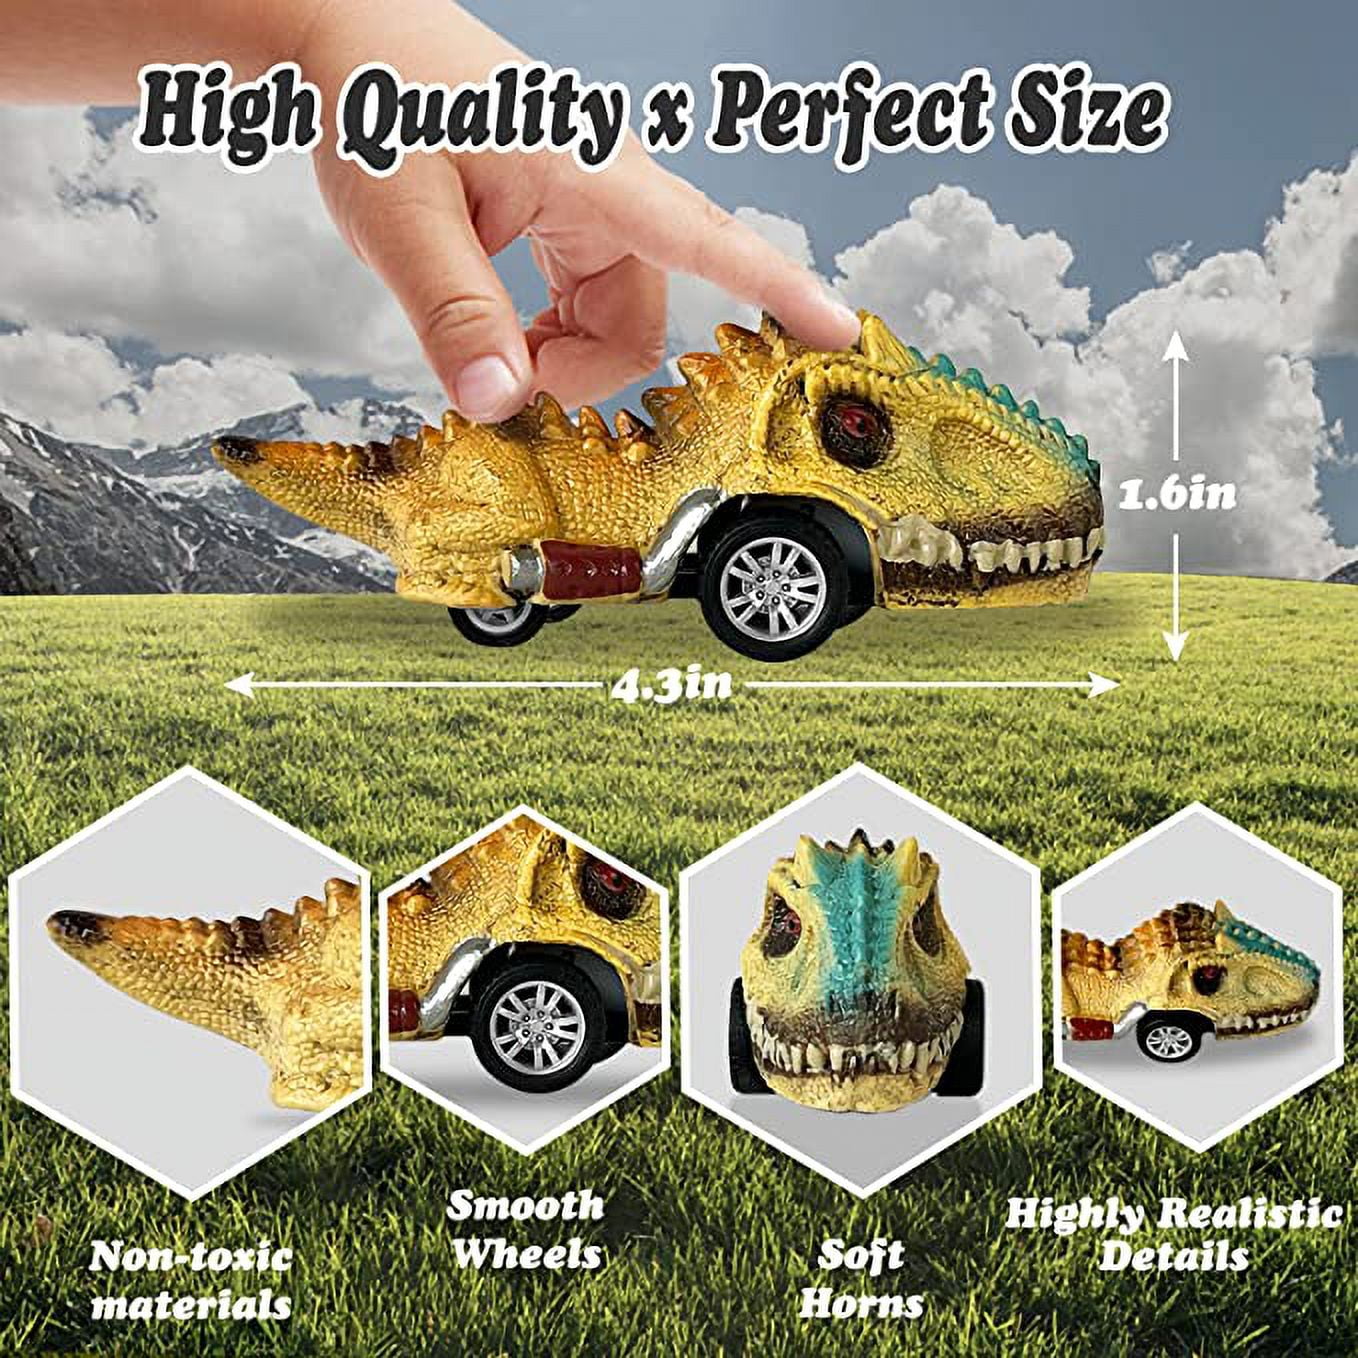 Dream Fun Dinosaur Toys for 2 3 4 5 Year Old Boys, Gift Ideas for 1 2 3 Year  Old Toddler Xmas Gifts for Kids 3 4 5 6 7 8 Years Deformation Cars Dino  Vehicle Toys for Autistic Children Robot Car 